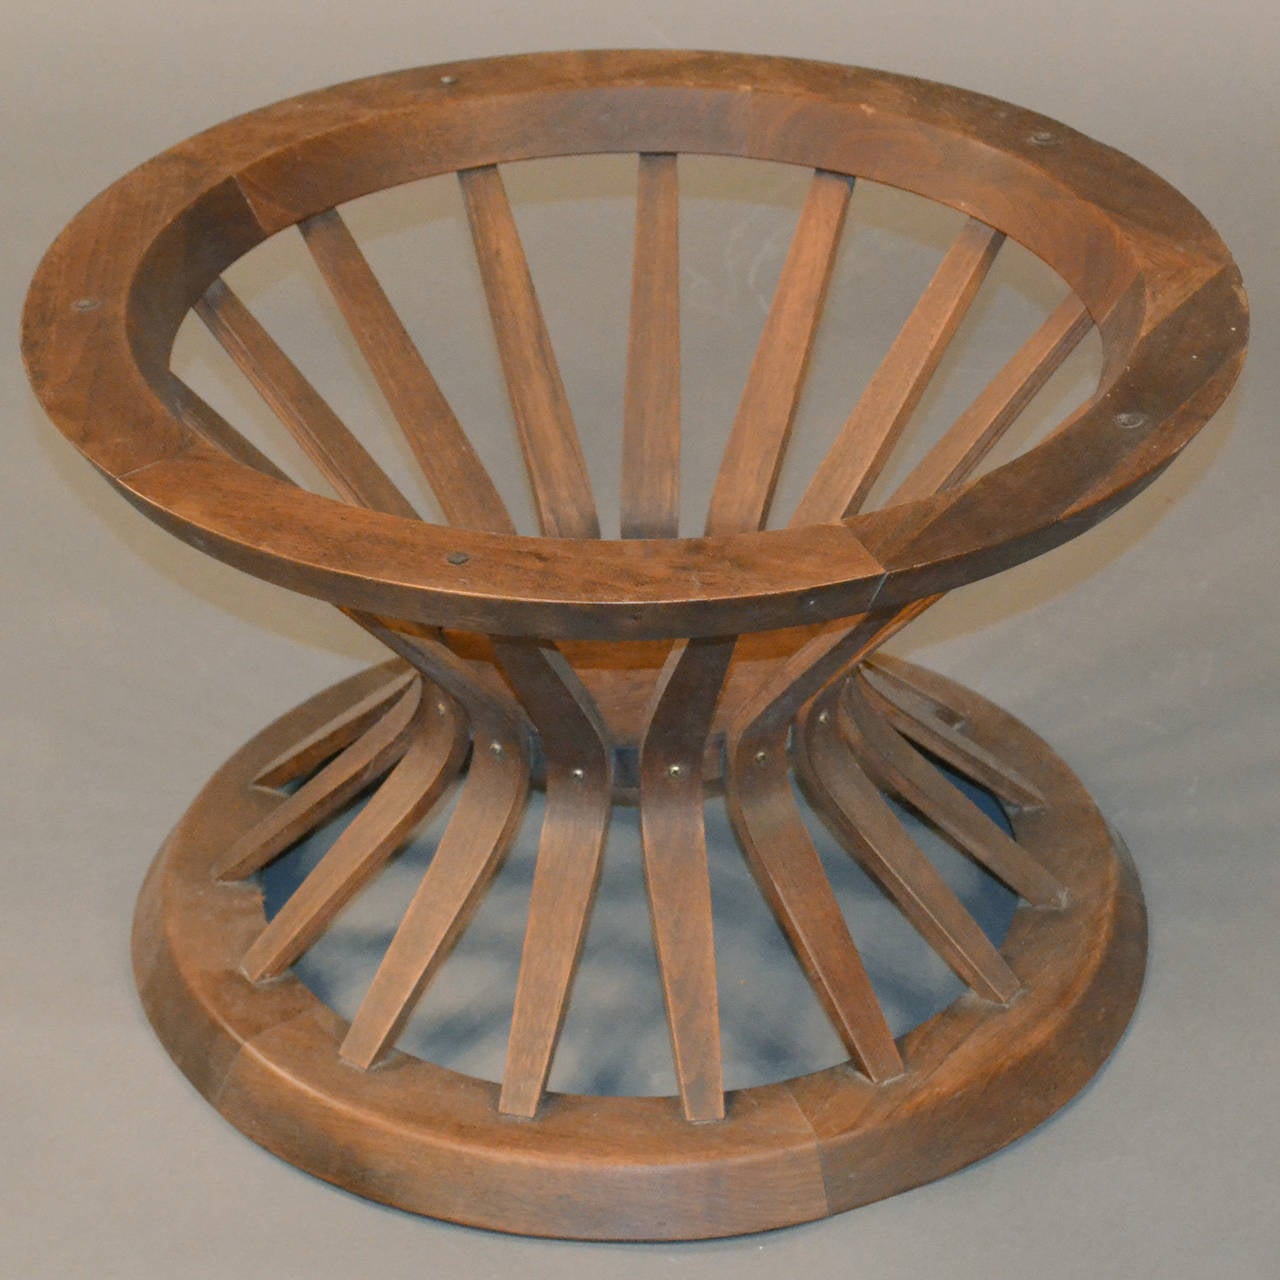 Mid-20th Century Sheaf of Wheat Coffee Table by Edward Wormley for Dunbar with Marble Top For Sale